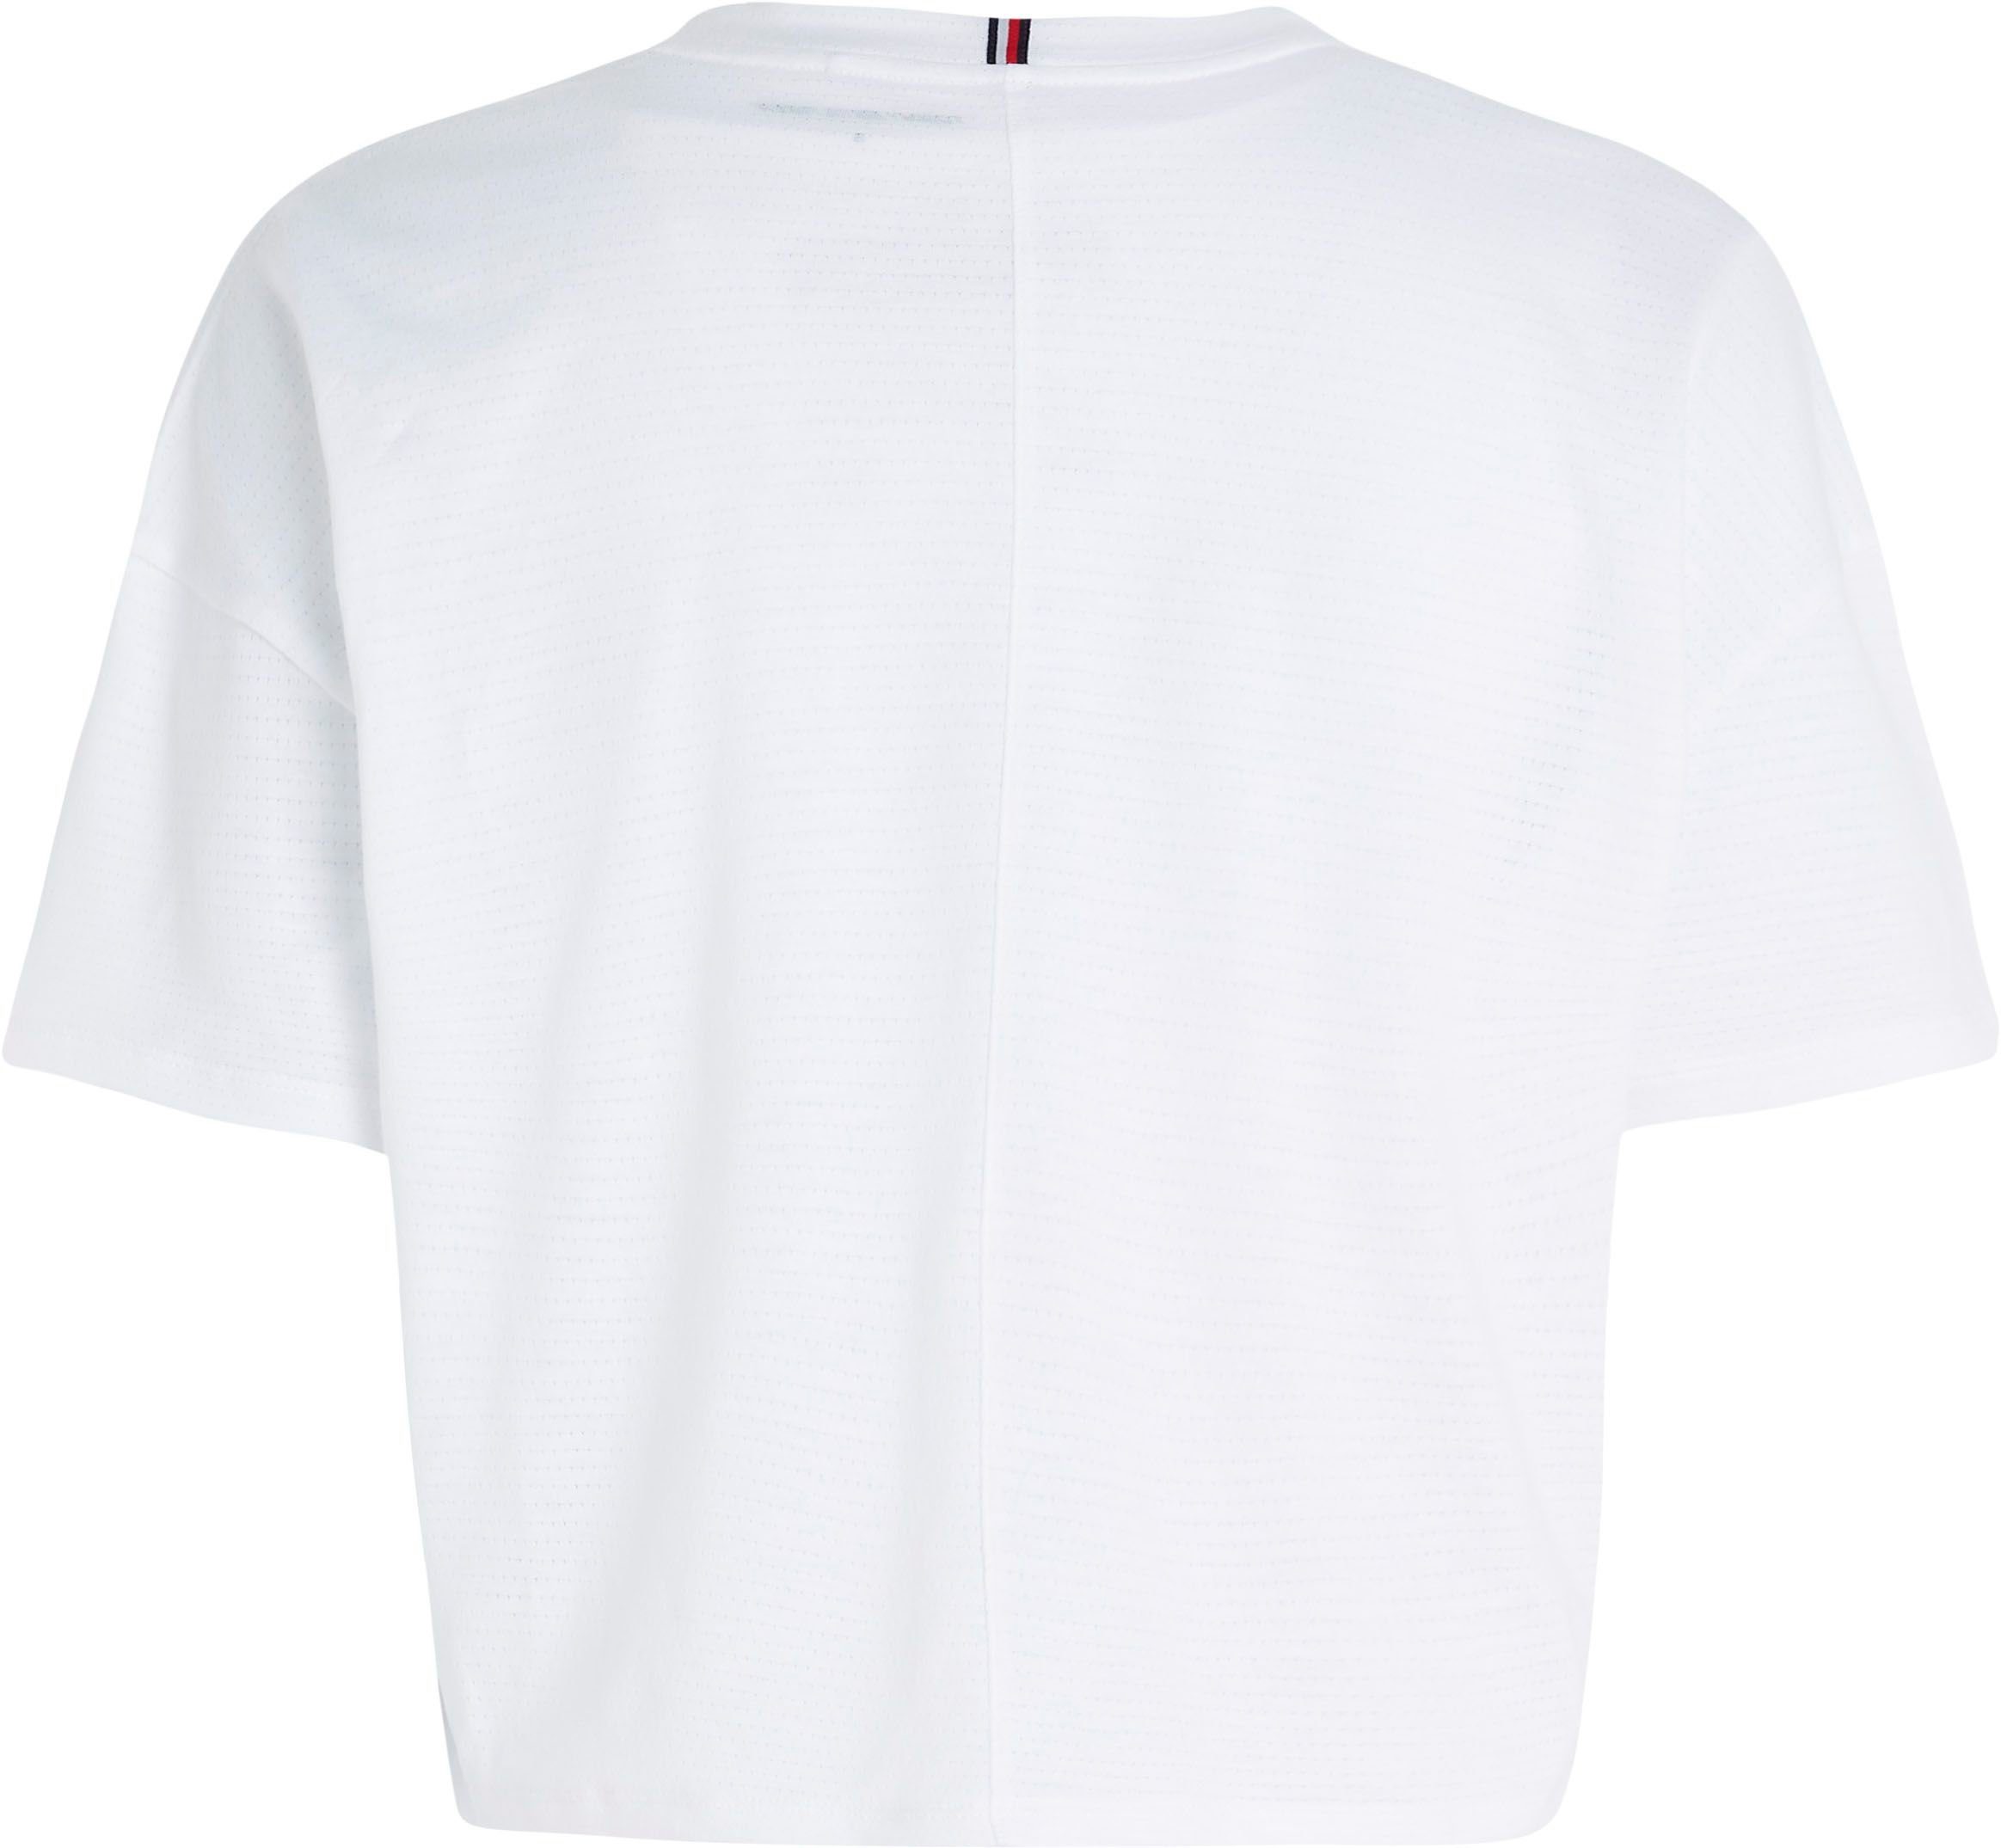 Tommy in Hilfiger Th-Optic-White cropped modischer T-Shirt Sport TEE Form CROPPED RELAXED ESSENTIALS